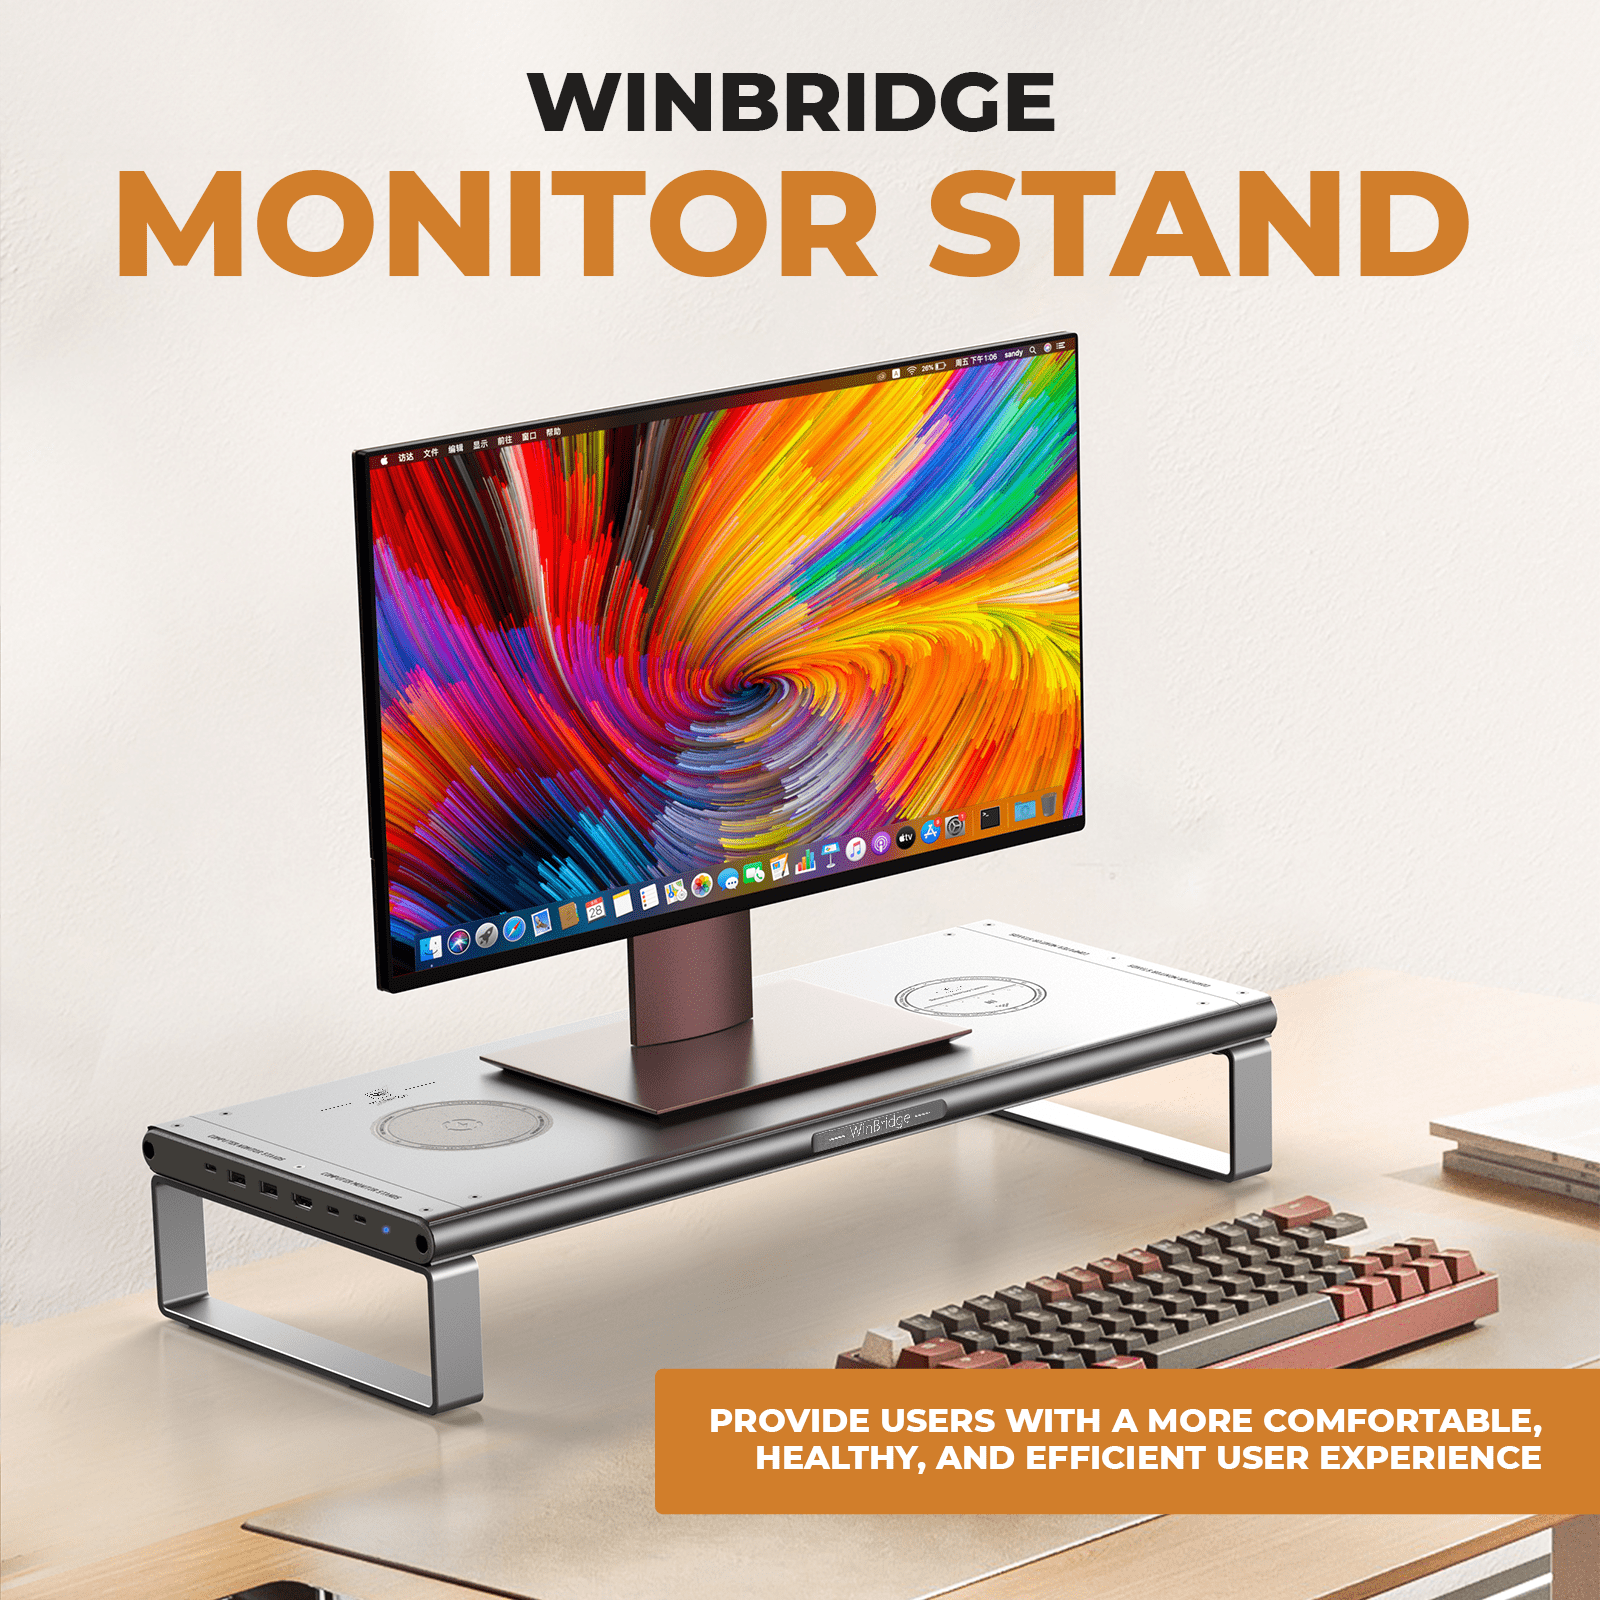 WinBridge Aluminum Monitor Stand with Wireless Charging, 6-in-1 USB-C Docking Station, Drawer, Desk Organizer for PC Monitor/Laptop Up to 27 inches